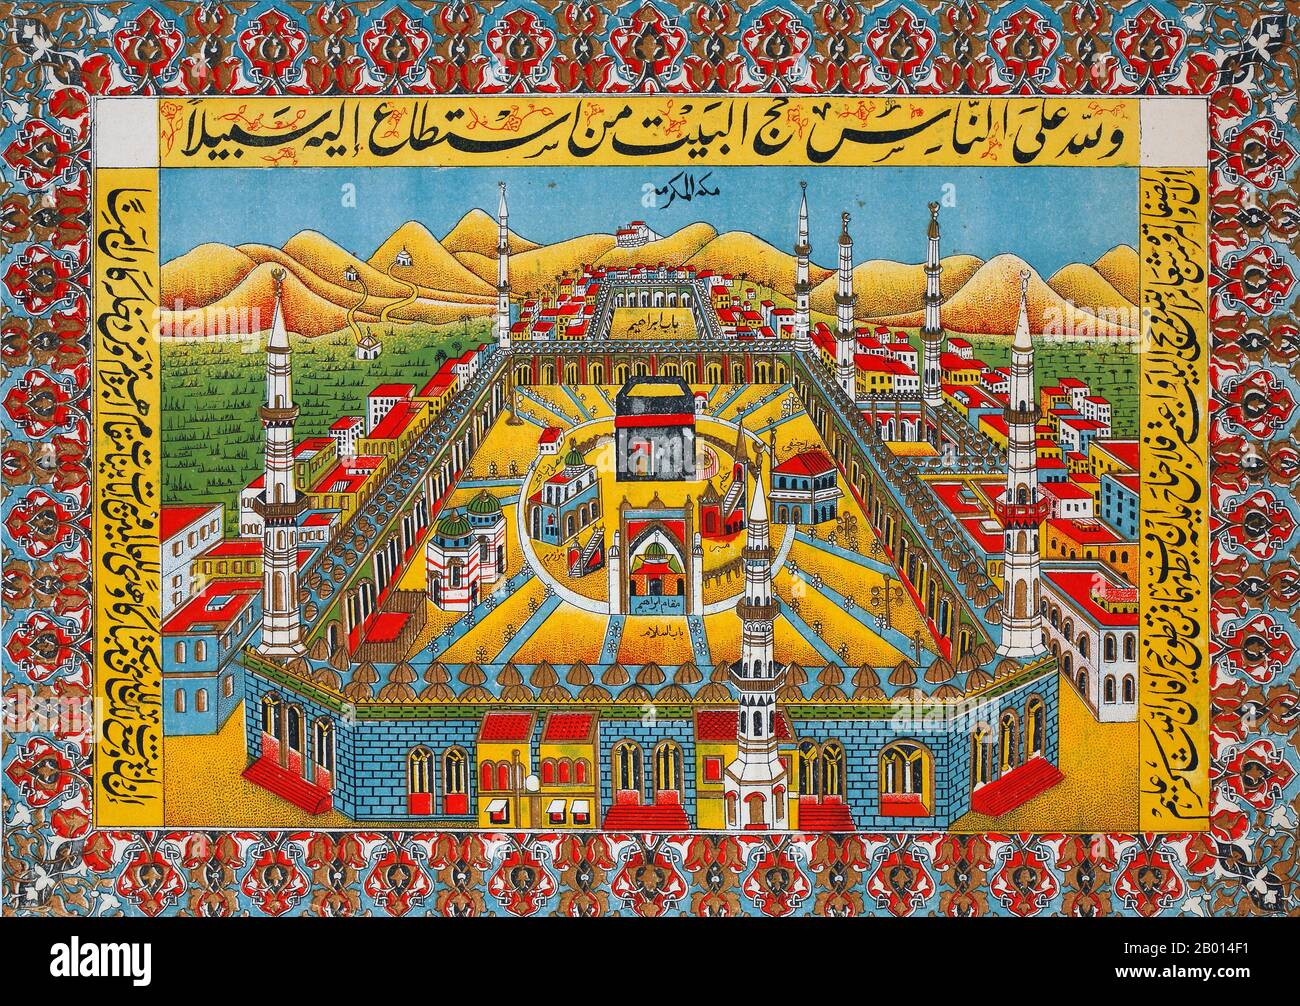 Arabia: Modern (20th century) diagrammatic painting of the Masjid al-Haram in Mecca (Makkah), designed as a souvenir and guide for pilgrims.  Surrounded by the Holy Mosque, al-Masjid al-Haram, stands the cubic Kaaba. Shortly after they arrive in Mecca, pilgrims first walk around the Kaaba seven times and then walk back and forth between two hills, al-Safa and al-Marwa. They carry out a large number of rituals in the following days in both Mecca and its environs. Stock Photo